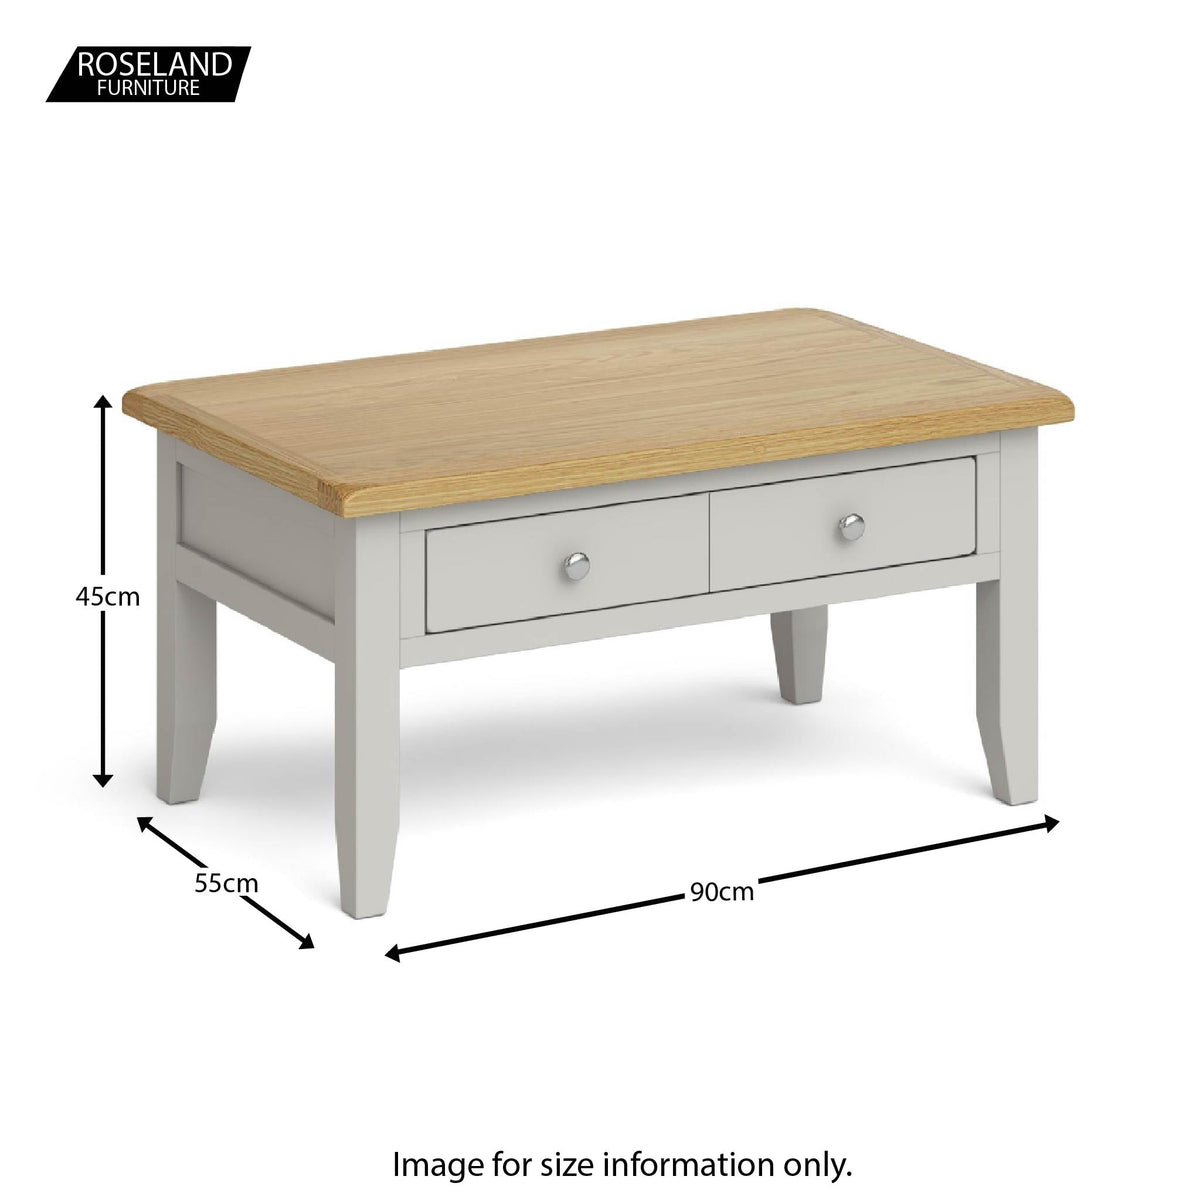 Dimensions - Lundy Grey Coffee Table